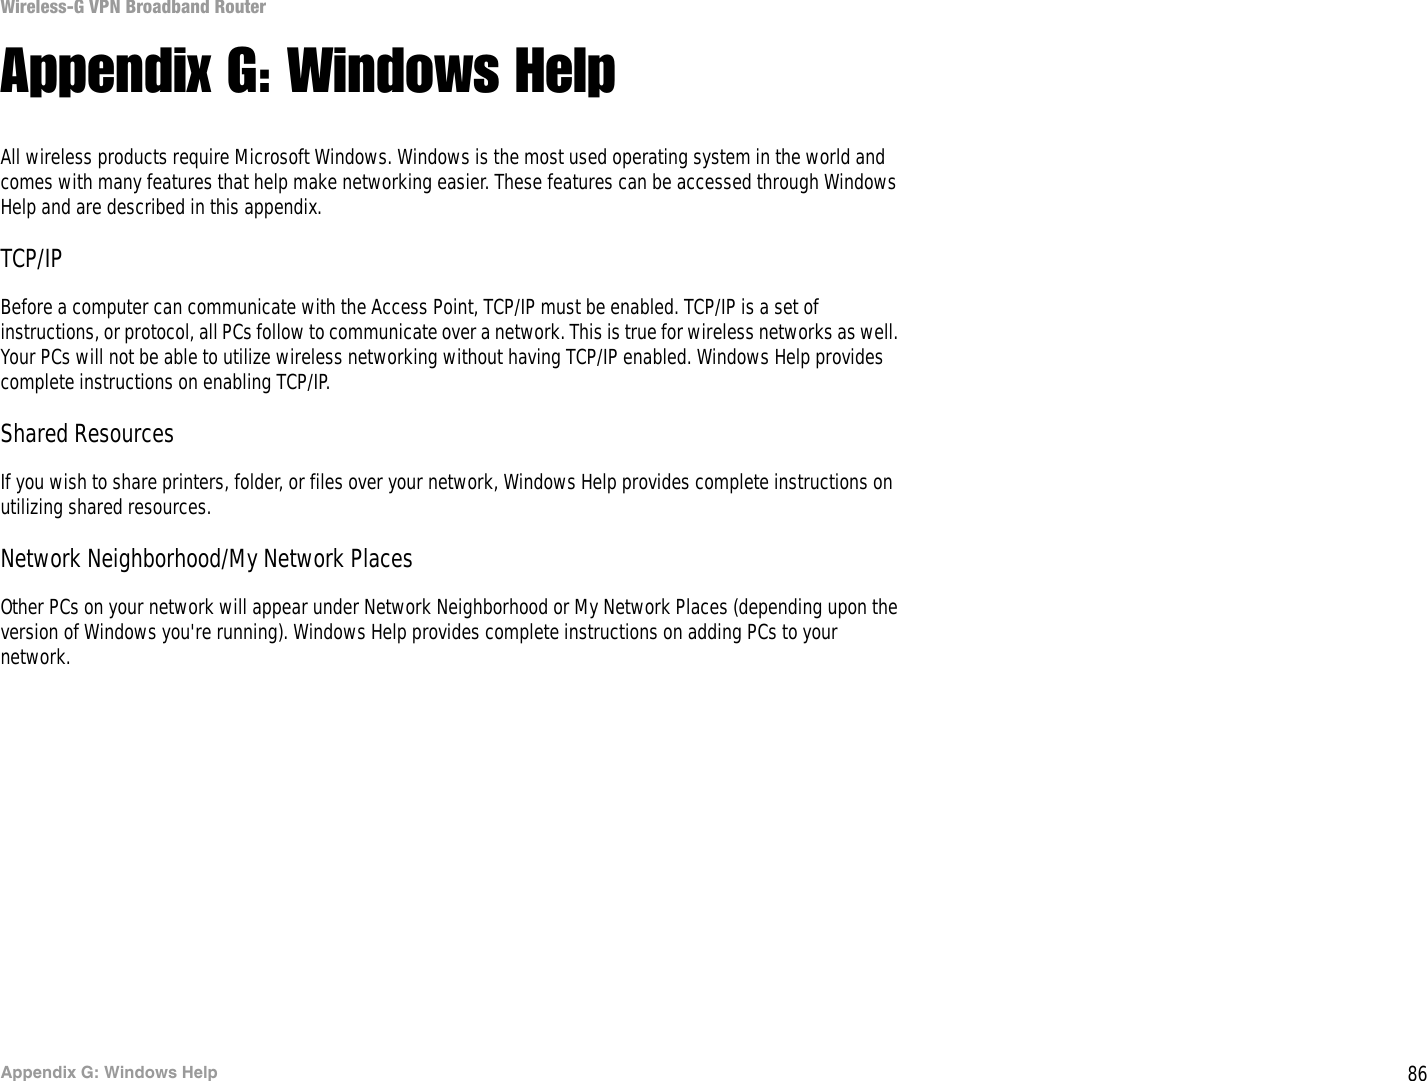 86Appendix G: Windows HelpWireless-G VPN Broadband RouterAppendix G: Windows HelpAll wireless products require Microsoft Windows. Windows is the most used operating system in the world and comes with many features that help make networking easier. These features can be accessed through Windows Help and are described in this appendix.TCP/IPBefore a computer can communicate with the Access Point, TCP/IP must be enabled. TCP/IP is a set of instructions, or protocol, all PCs follow to communicate over a network. This is true for wireless networks as well. Your PCs will not be able to utilize wireless networking without having TCP/IP enabled. Windows Help provides complete instructions on enabling TCP/IP.Shared ResourcesIf you wish to share printers, folder, or files over your network, Windows Help provides complete instructions on utilizing shared resources.Network Neighborhood/My Network PlacesOther PCs on your network will appear under Network Neighborhood or My Network Places (depending upon the version of Windows you&apos;re running). Windows Help provides complete instructions on adding PCs to your network.